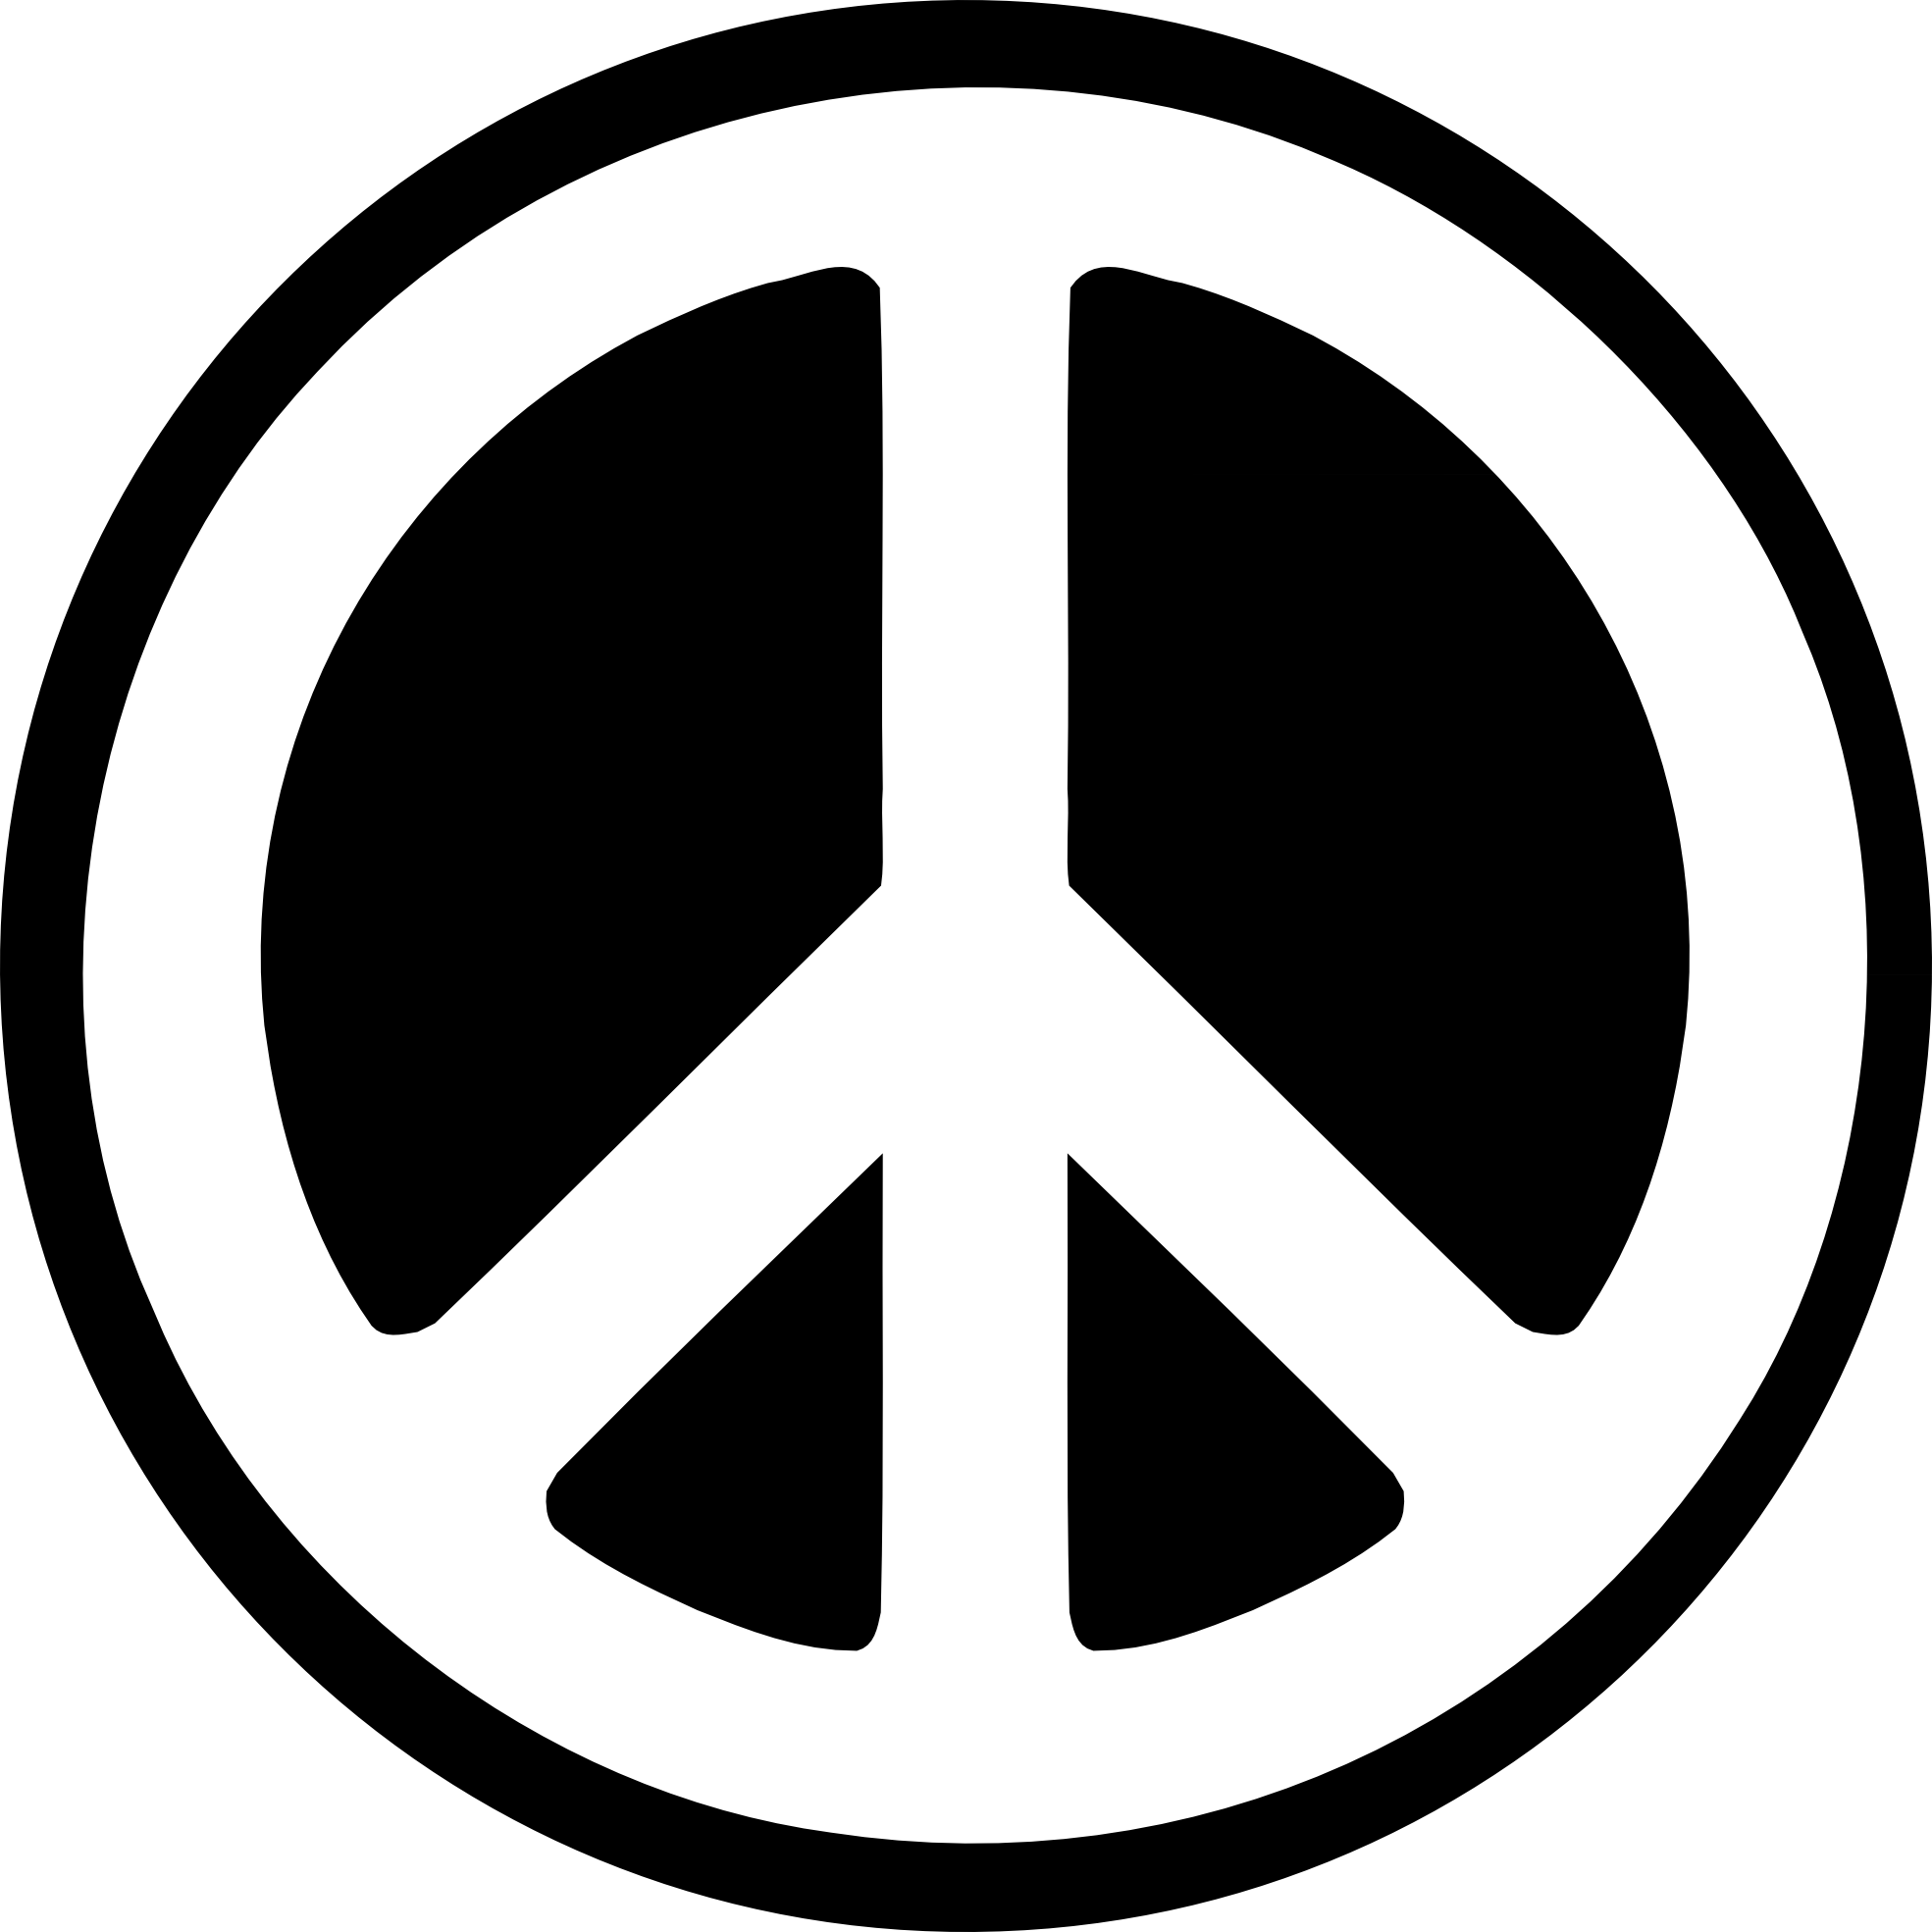 Peace clipart black and white. Sign panda free images